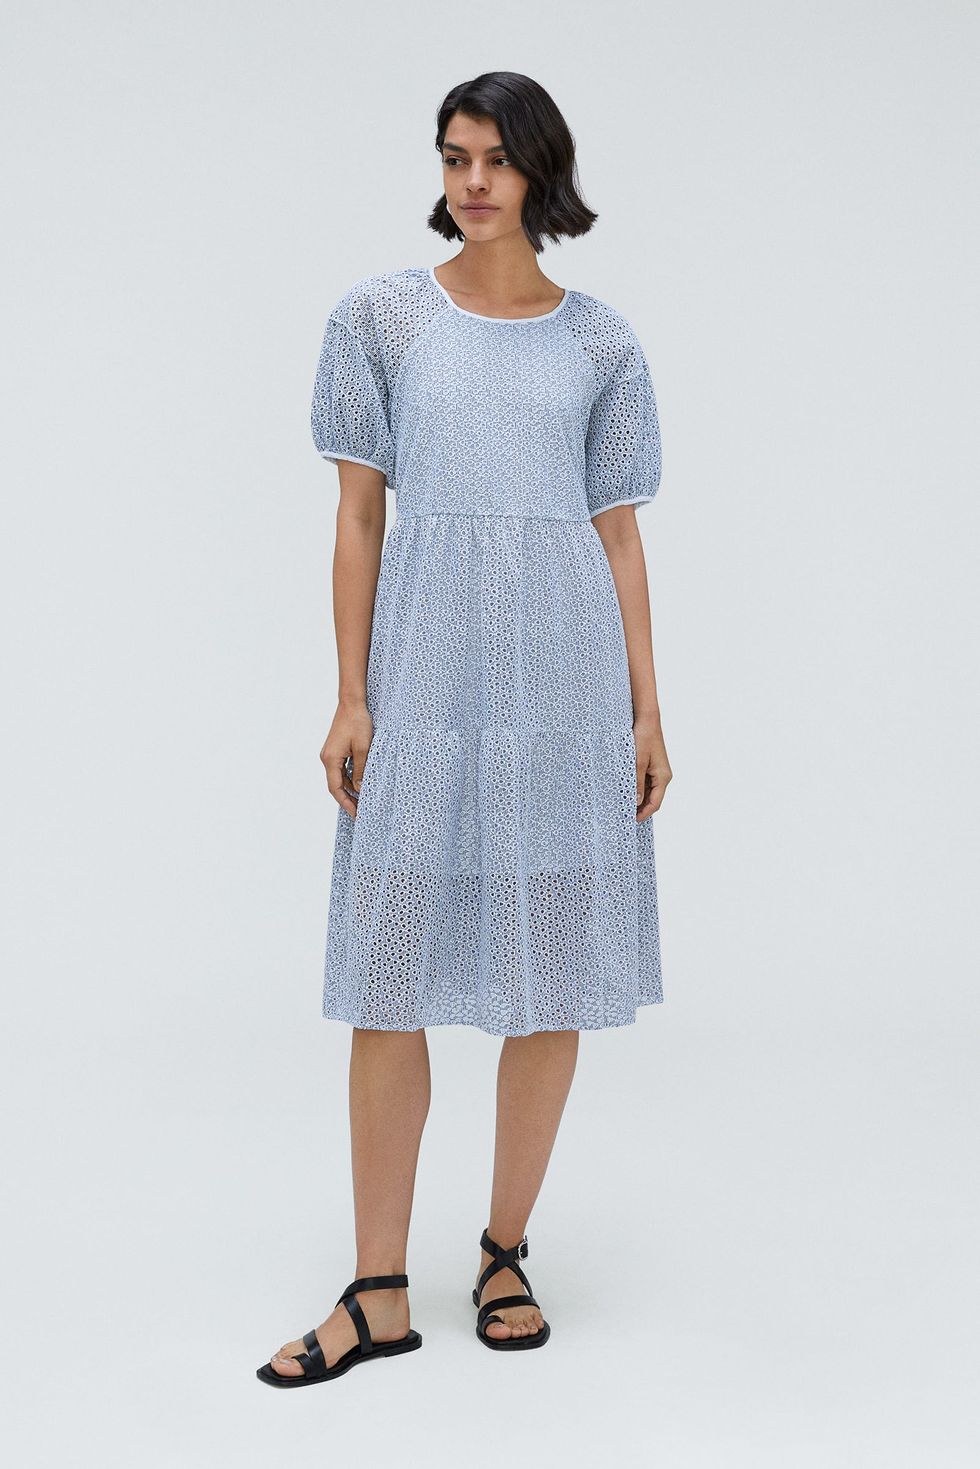 The Tiered Eyelet Dress